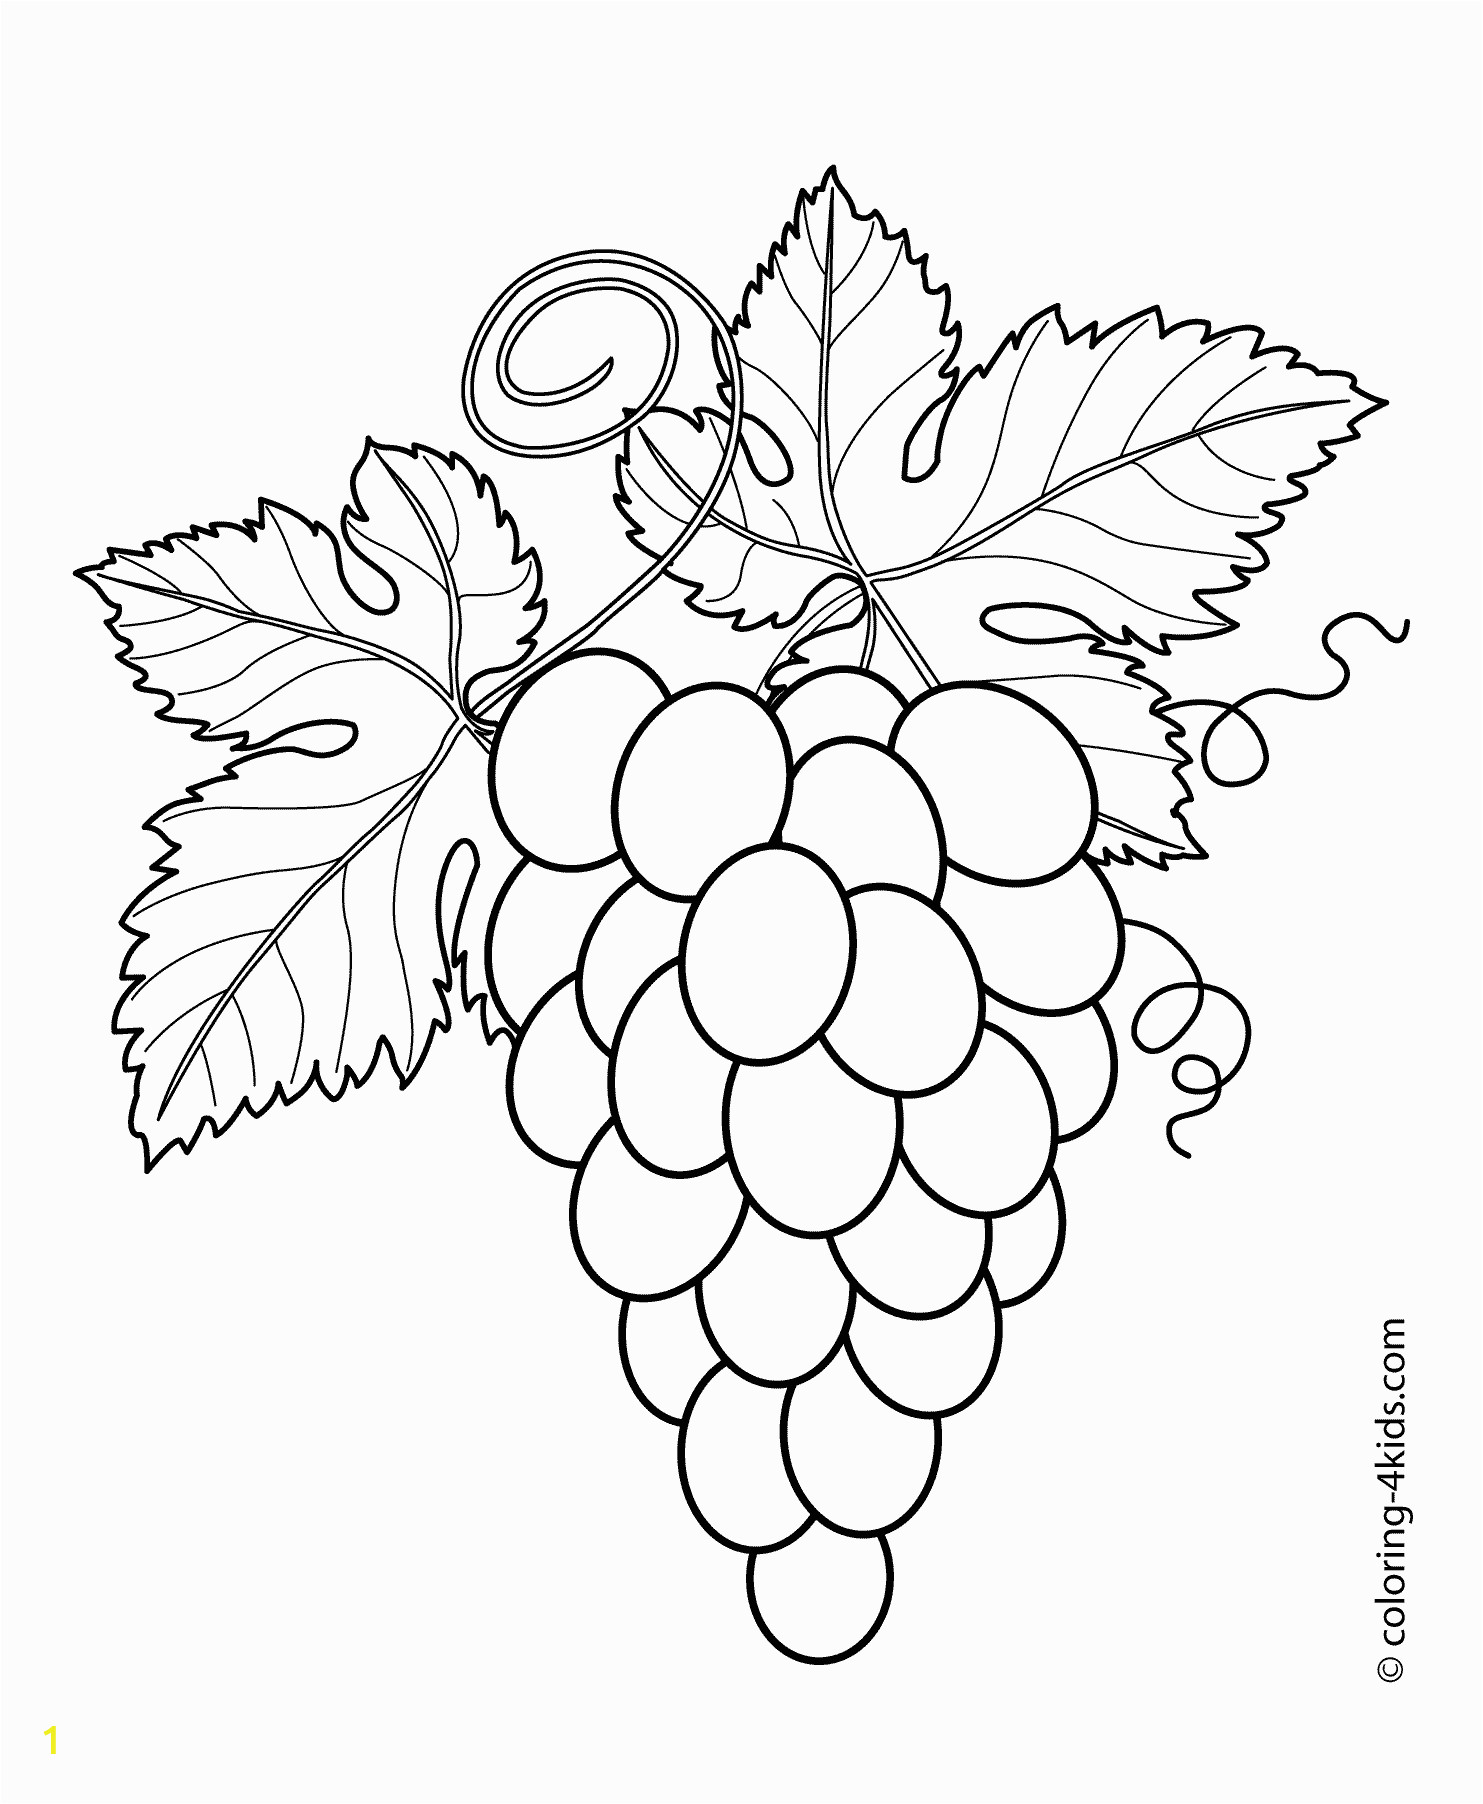 Printable Fruit Coloring Pages Grapes with Leaves Fruits and Berries Coloring Pages for